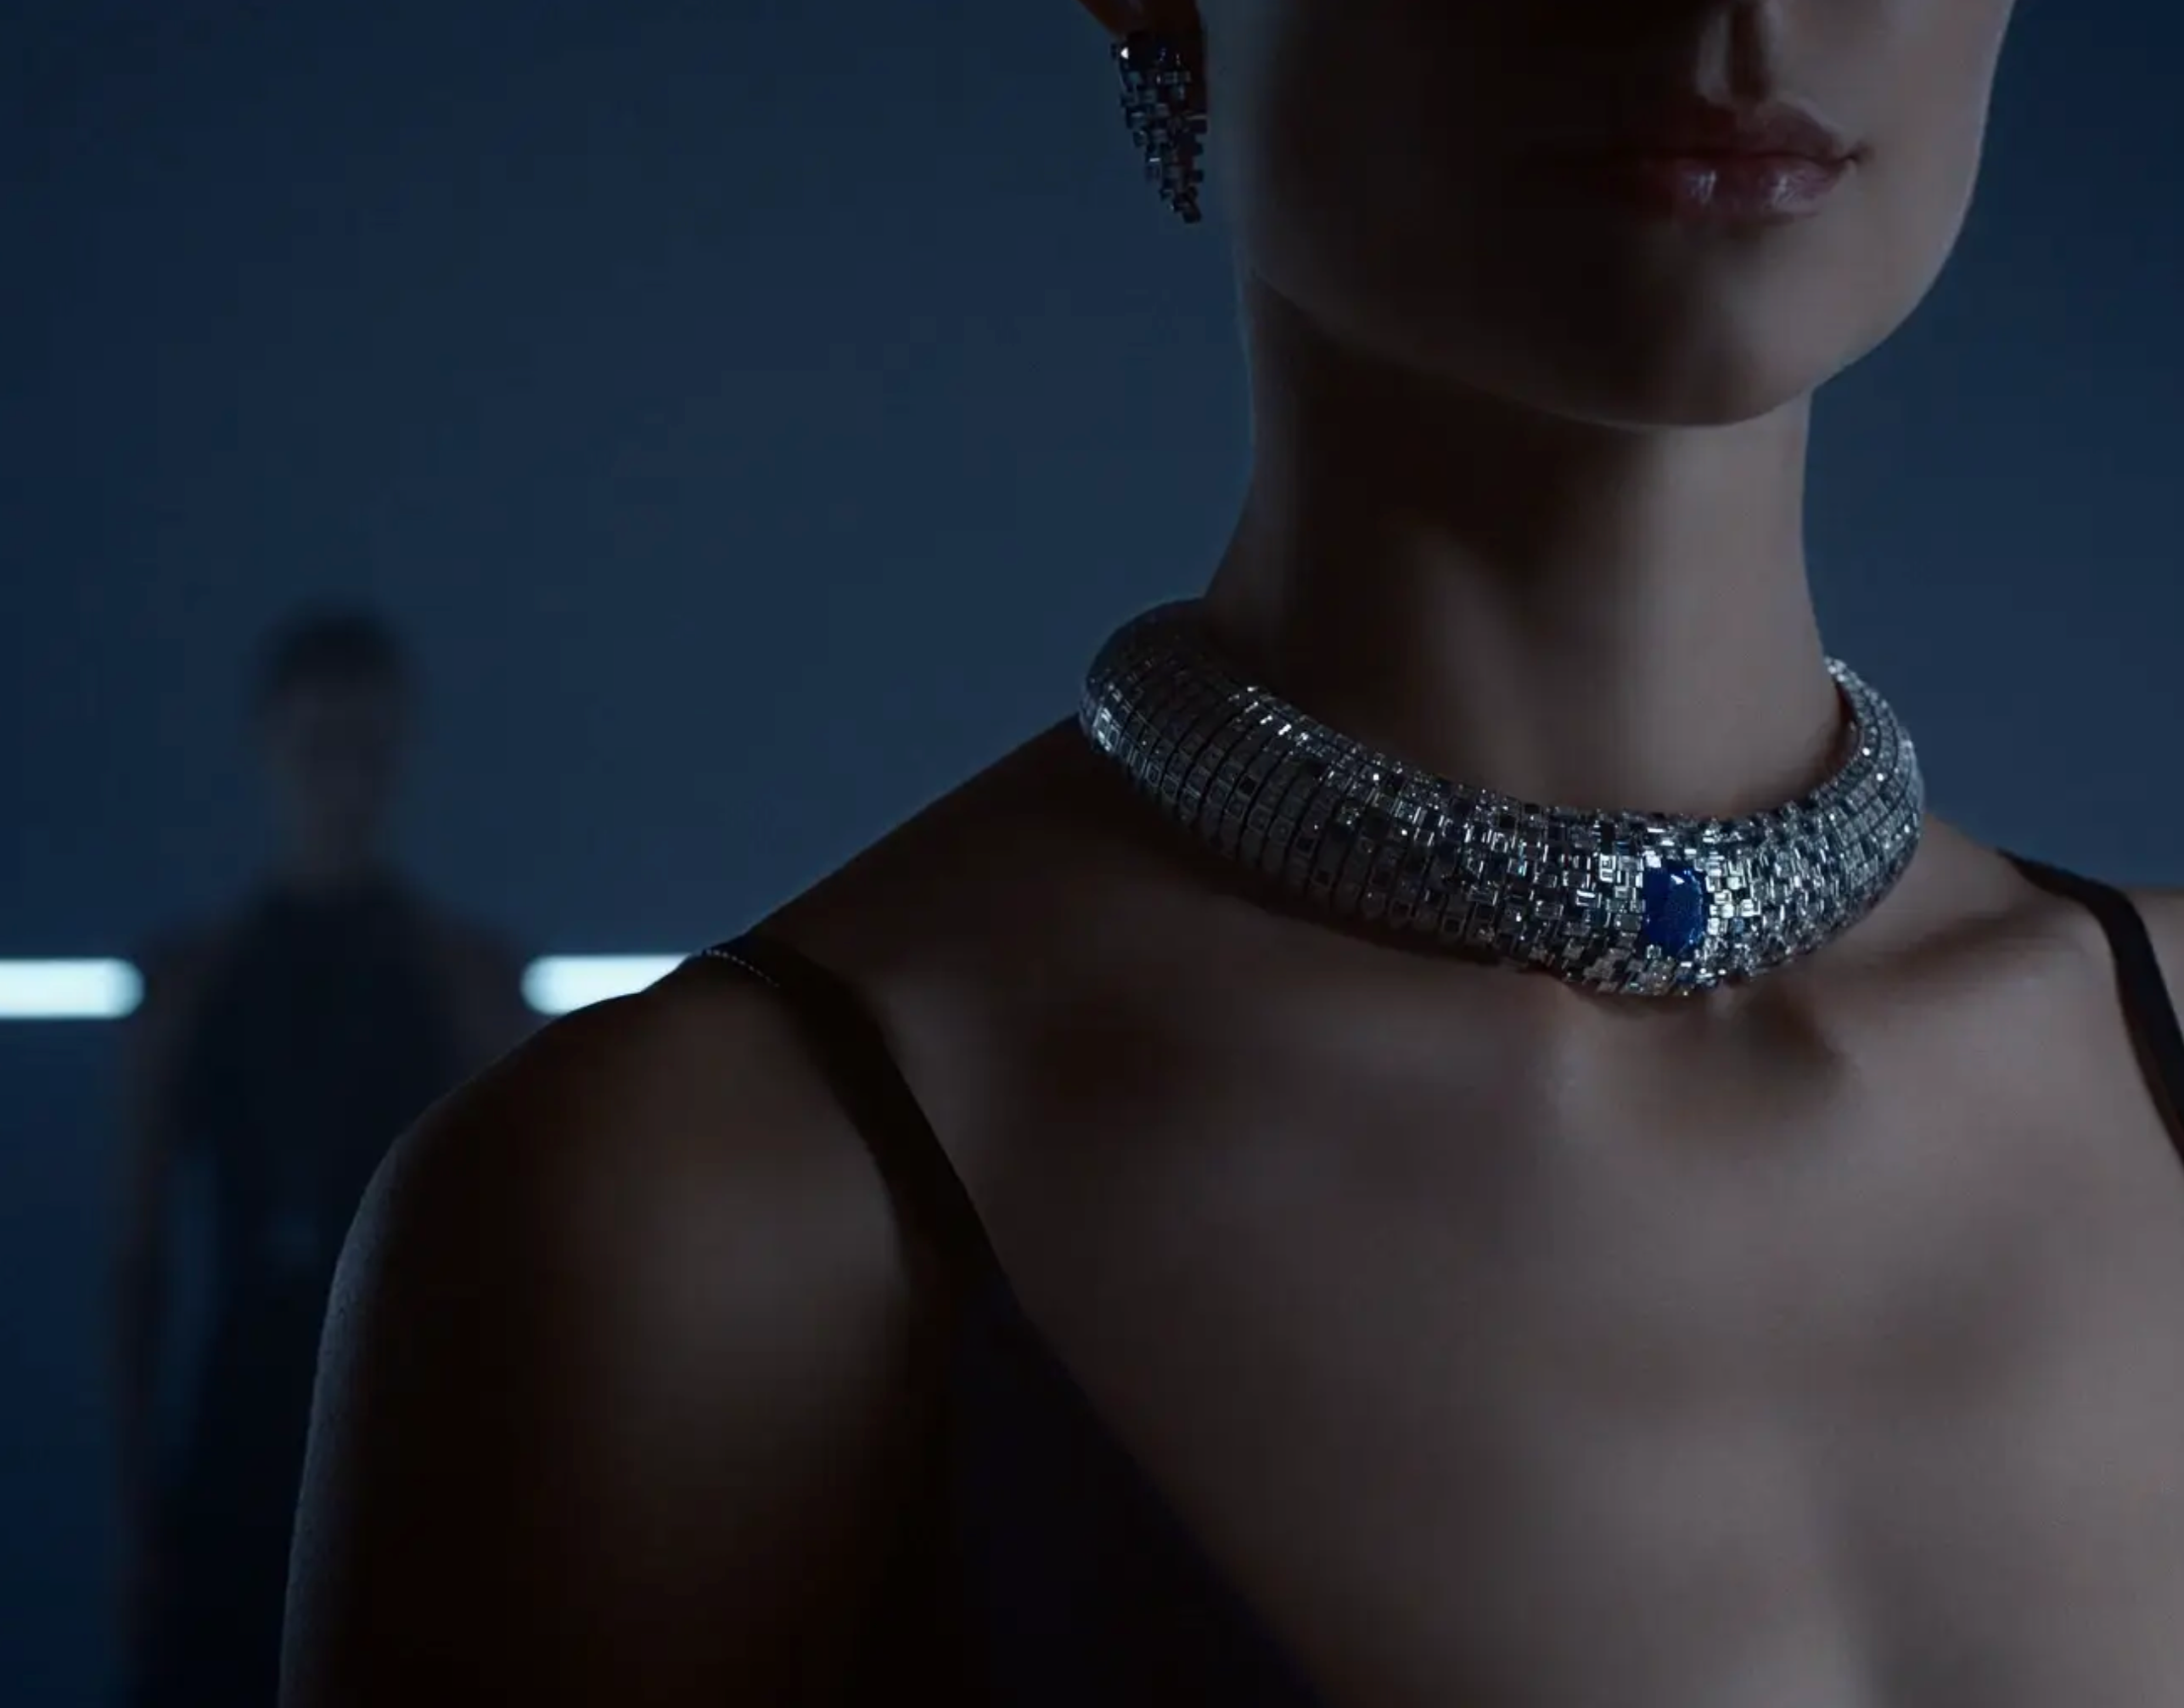 Louis Vuitton Stellar Times High Jewelry Collection